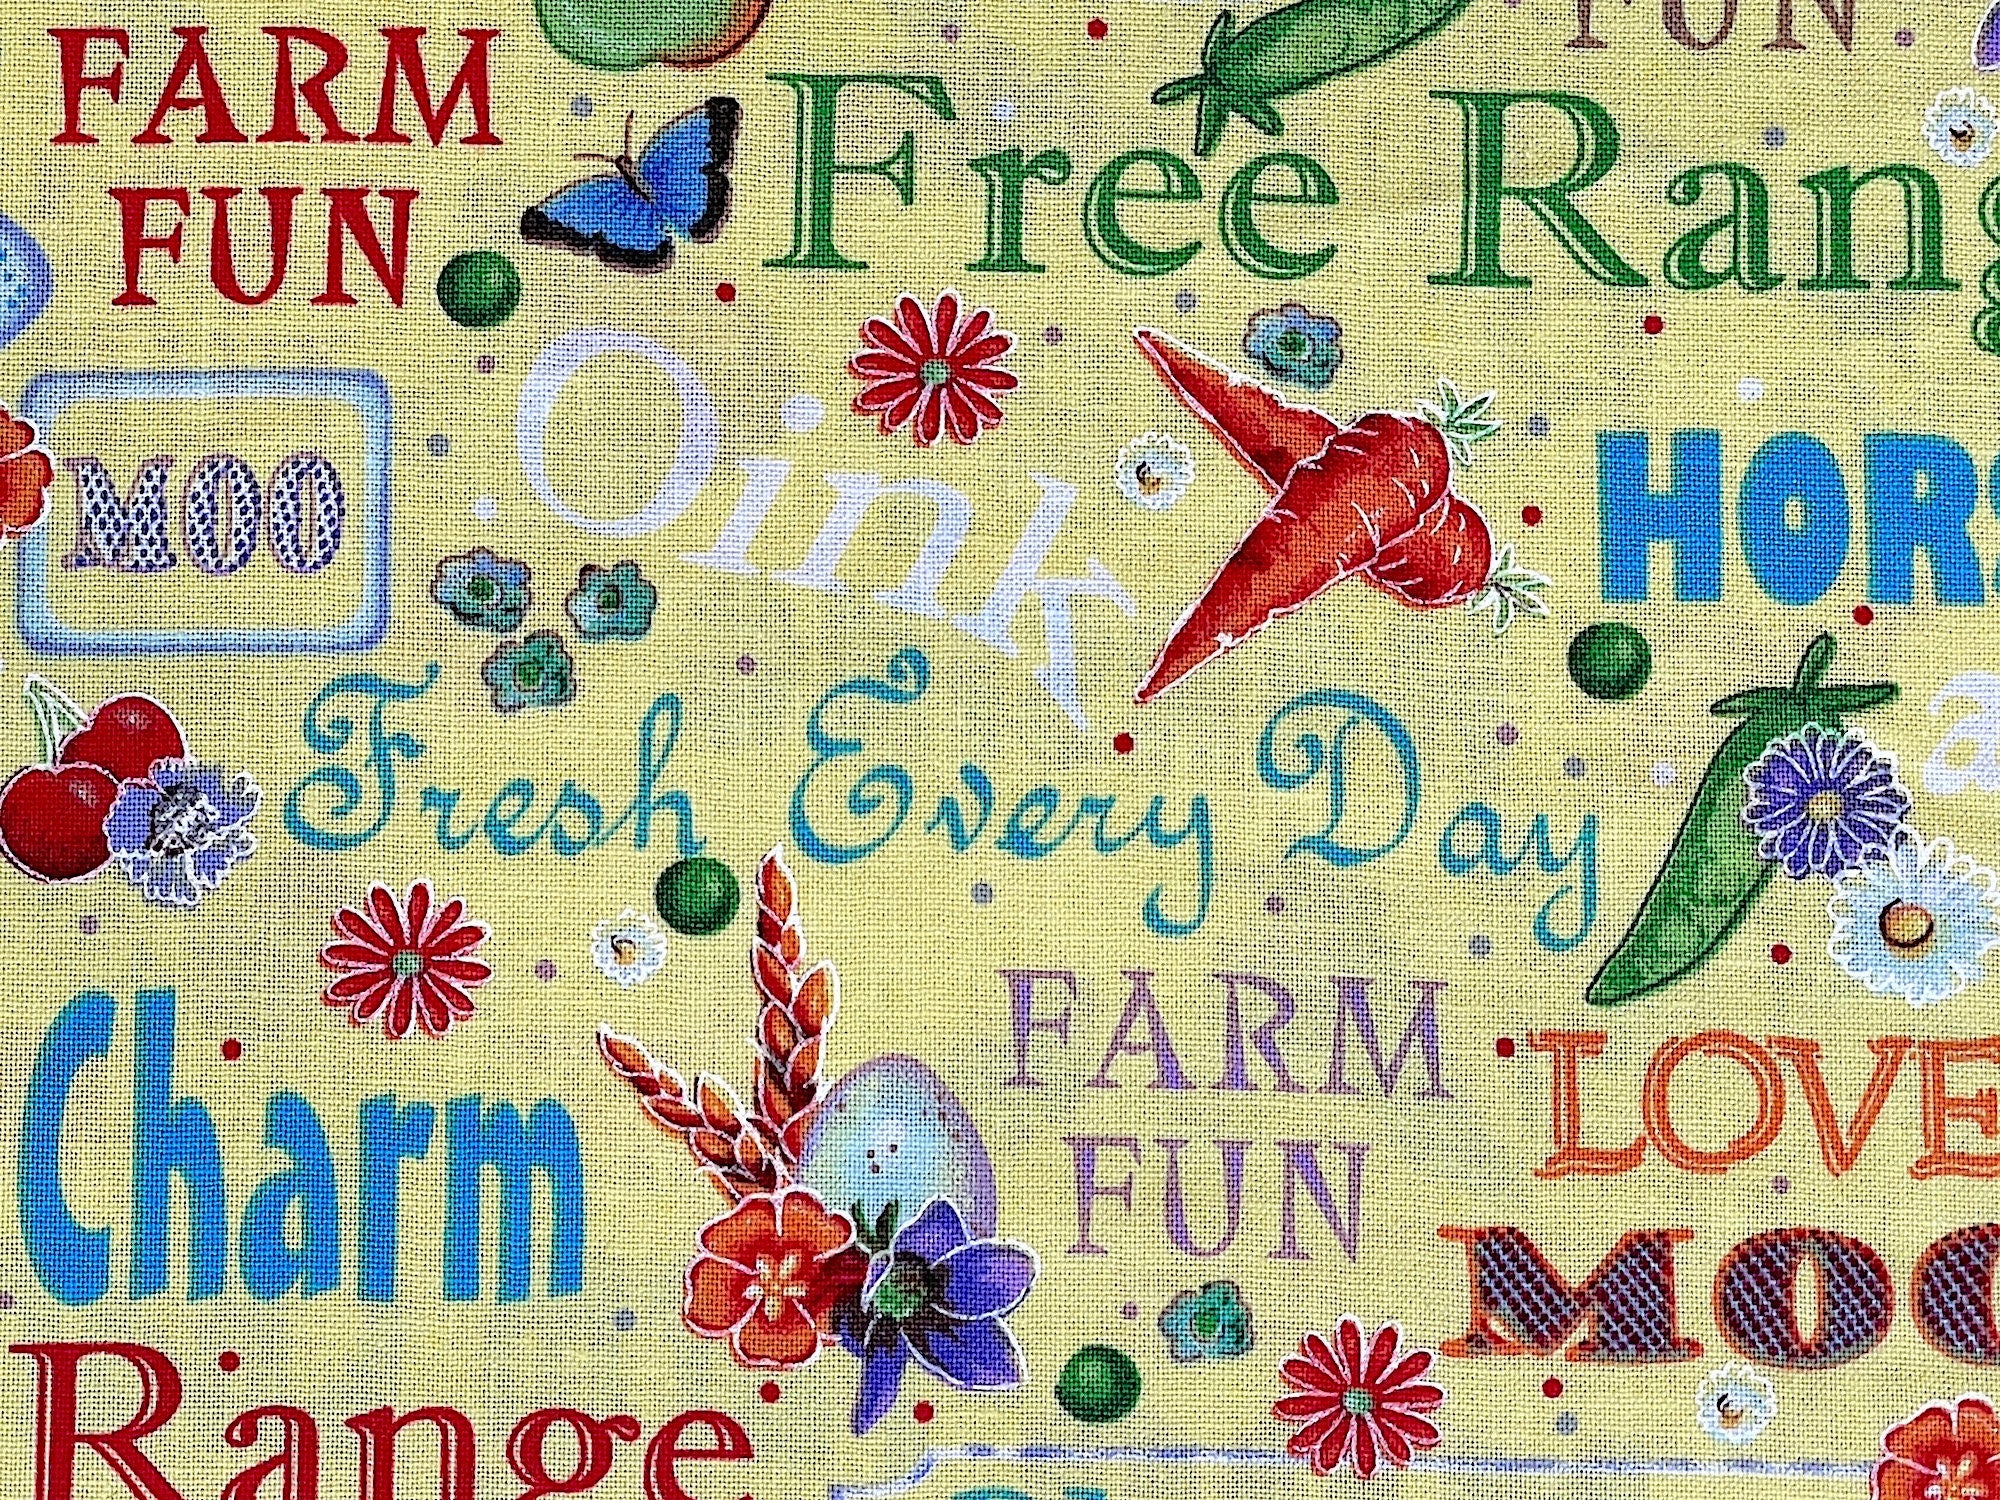 This yellow cotton fabric is covered with farm sayings such as farm charm, free range, fresh every day, farm fun horsing and more. There are also eggs, peas, apples, pears, cherries, flowers and more scattered throughout this fabric.